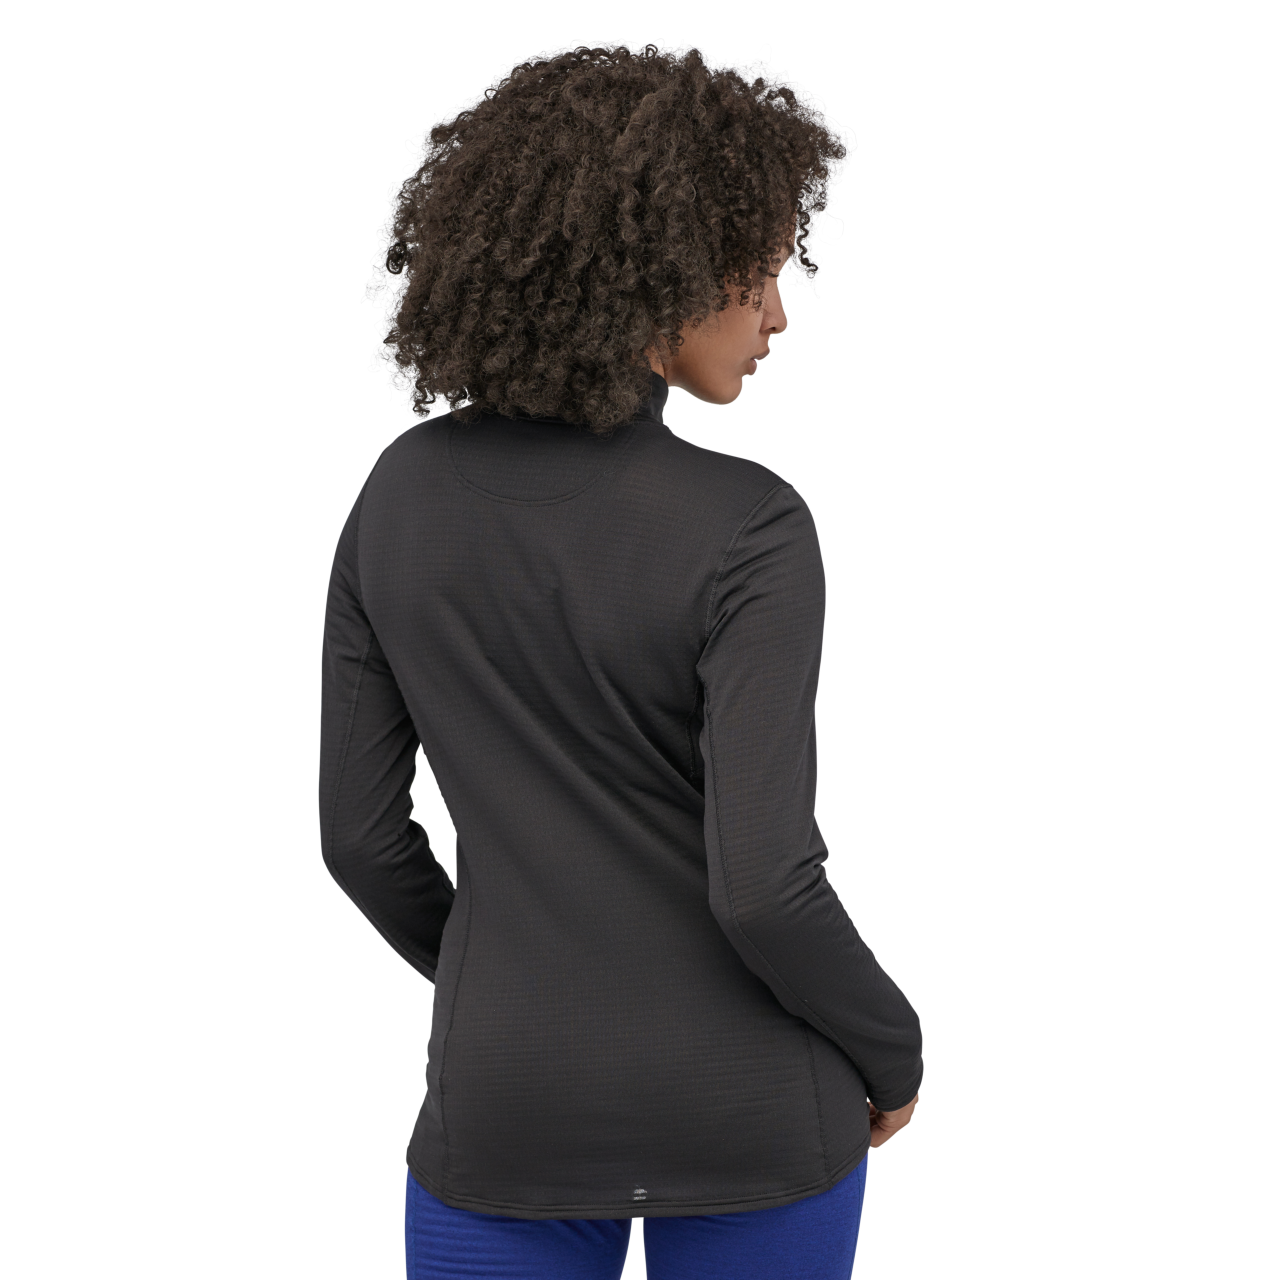 Capilene Thermal Weight - Women's from Patagonia